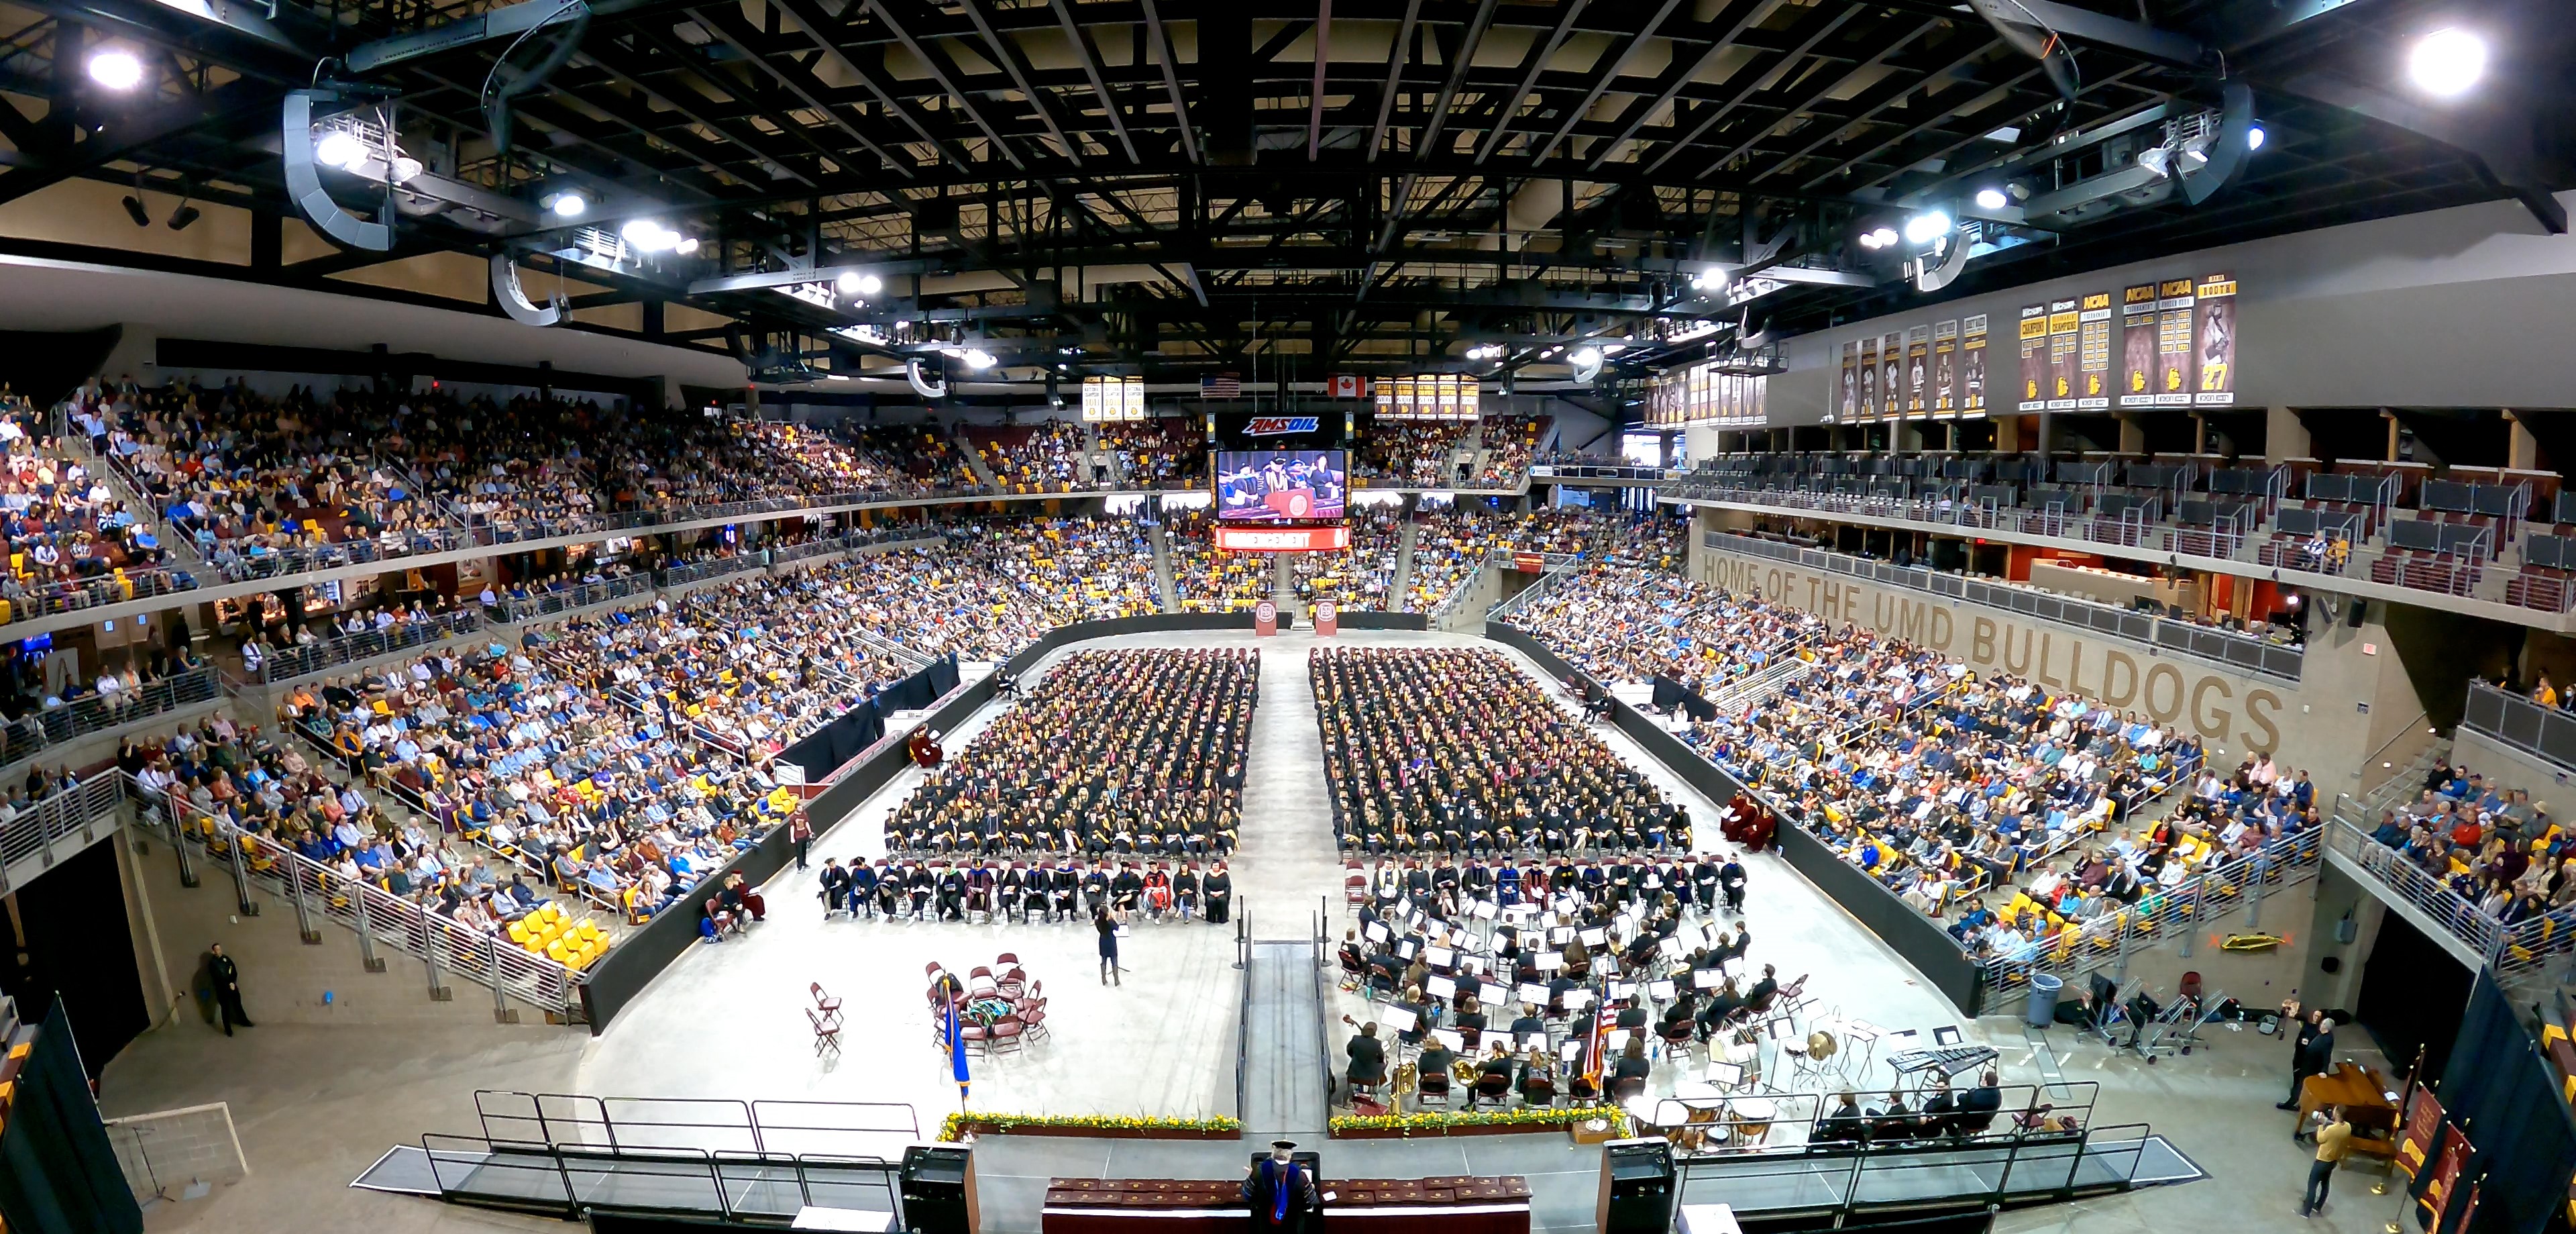 AMSOIL Arena during the commencement ceremony, full of graduates and their families and friends